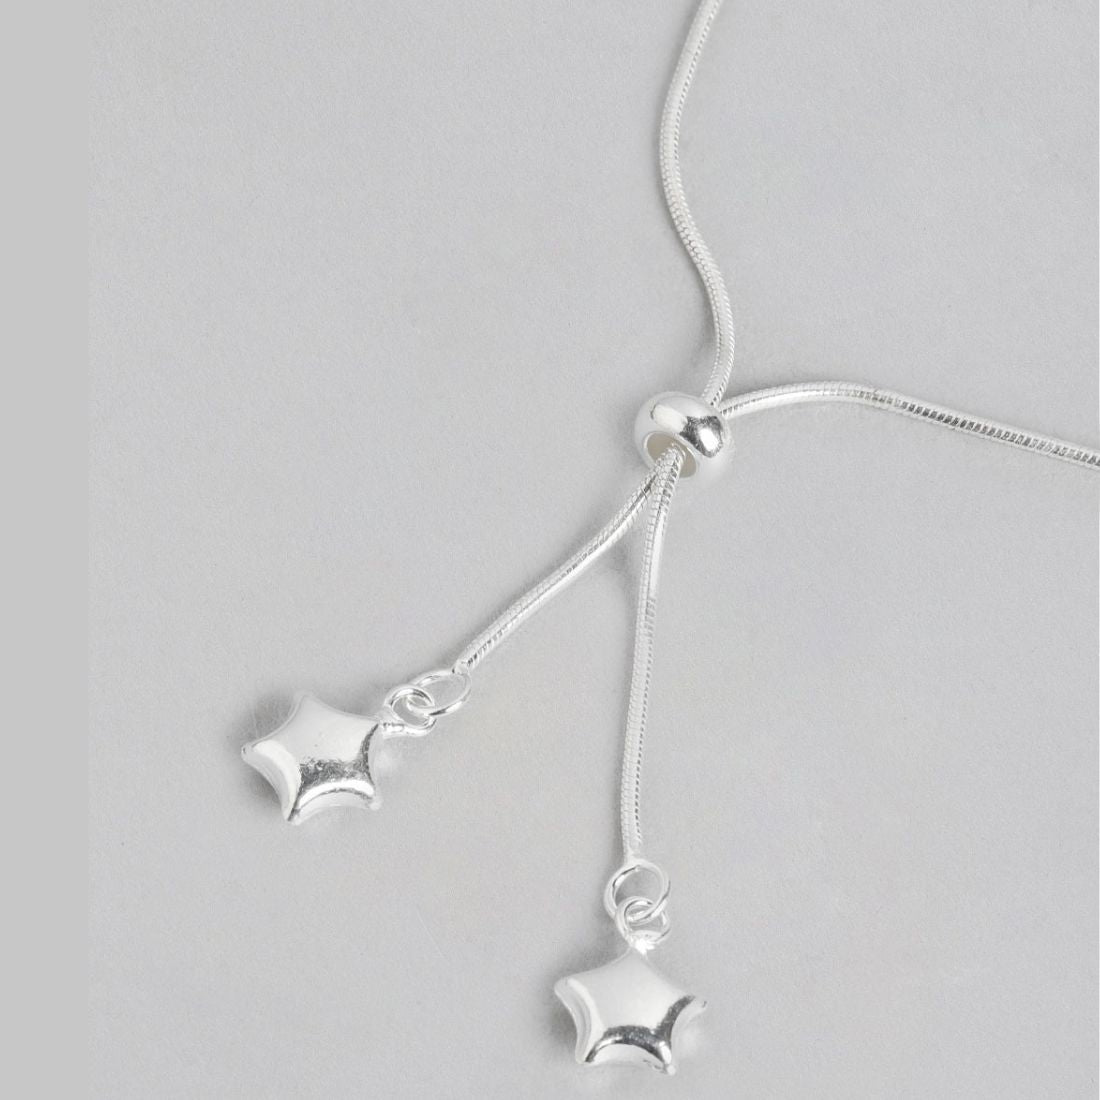 Lustrous Glow Rhodium Plated 925 Sterling Silver Anklet with Silver Balls